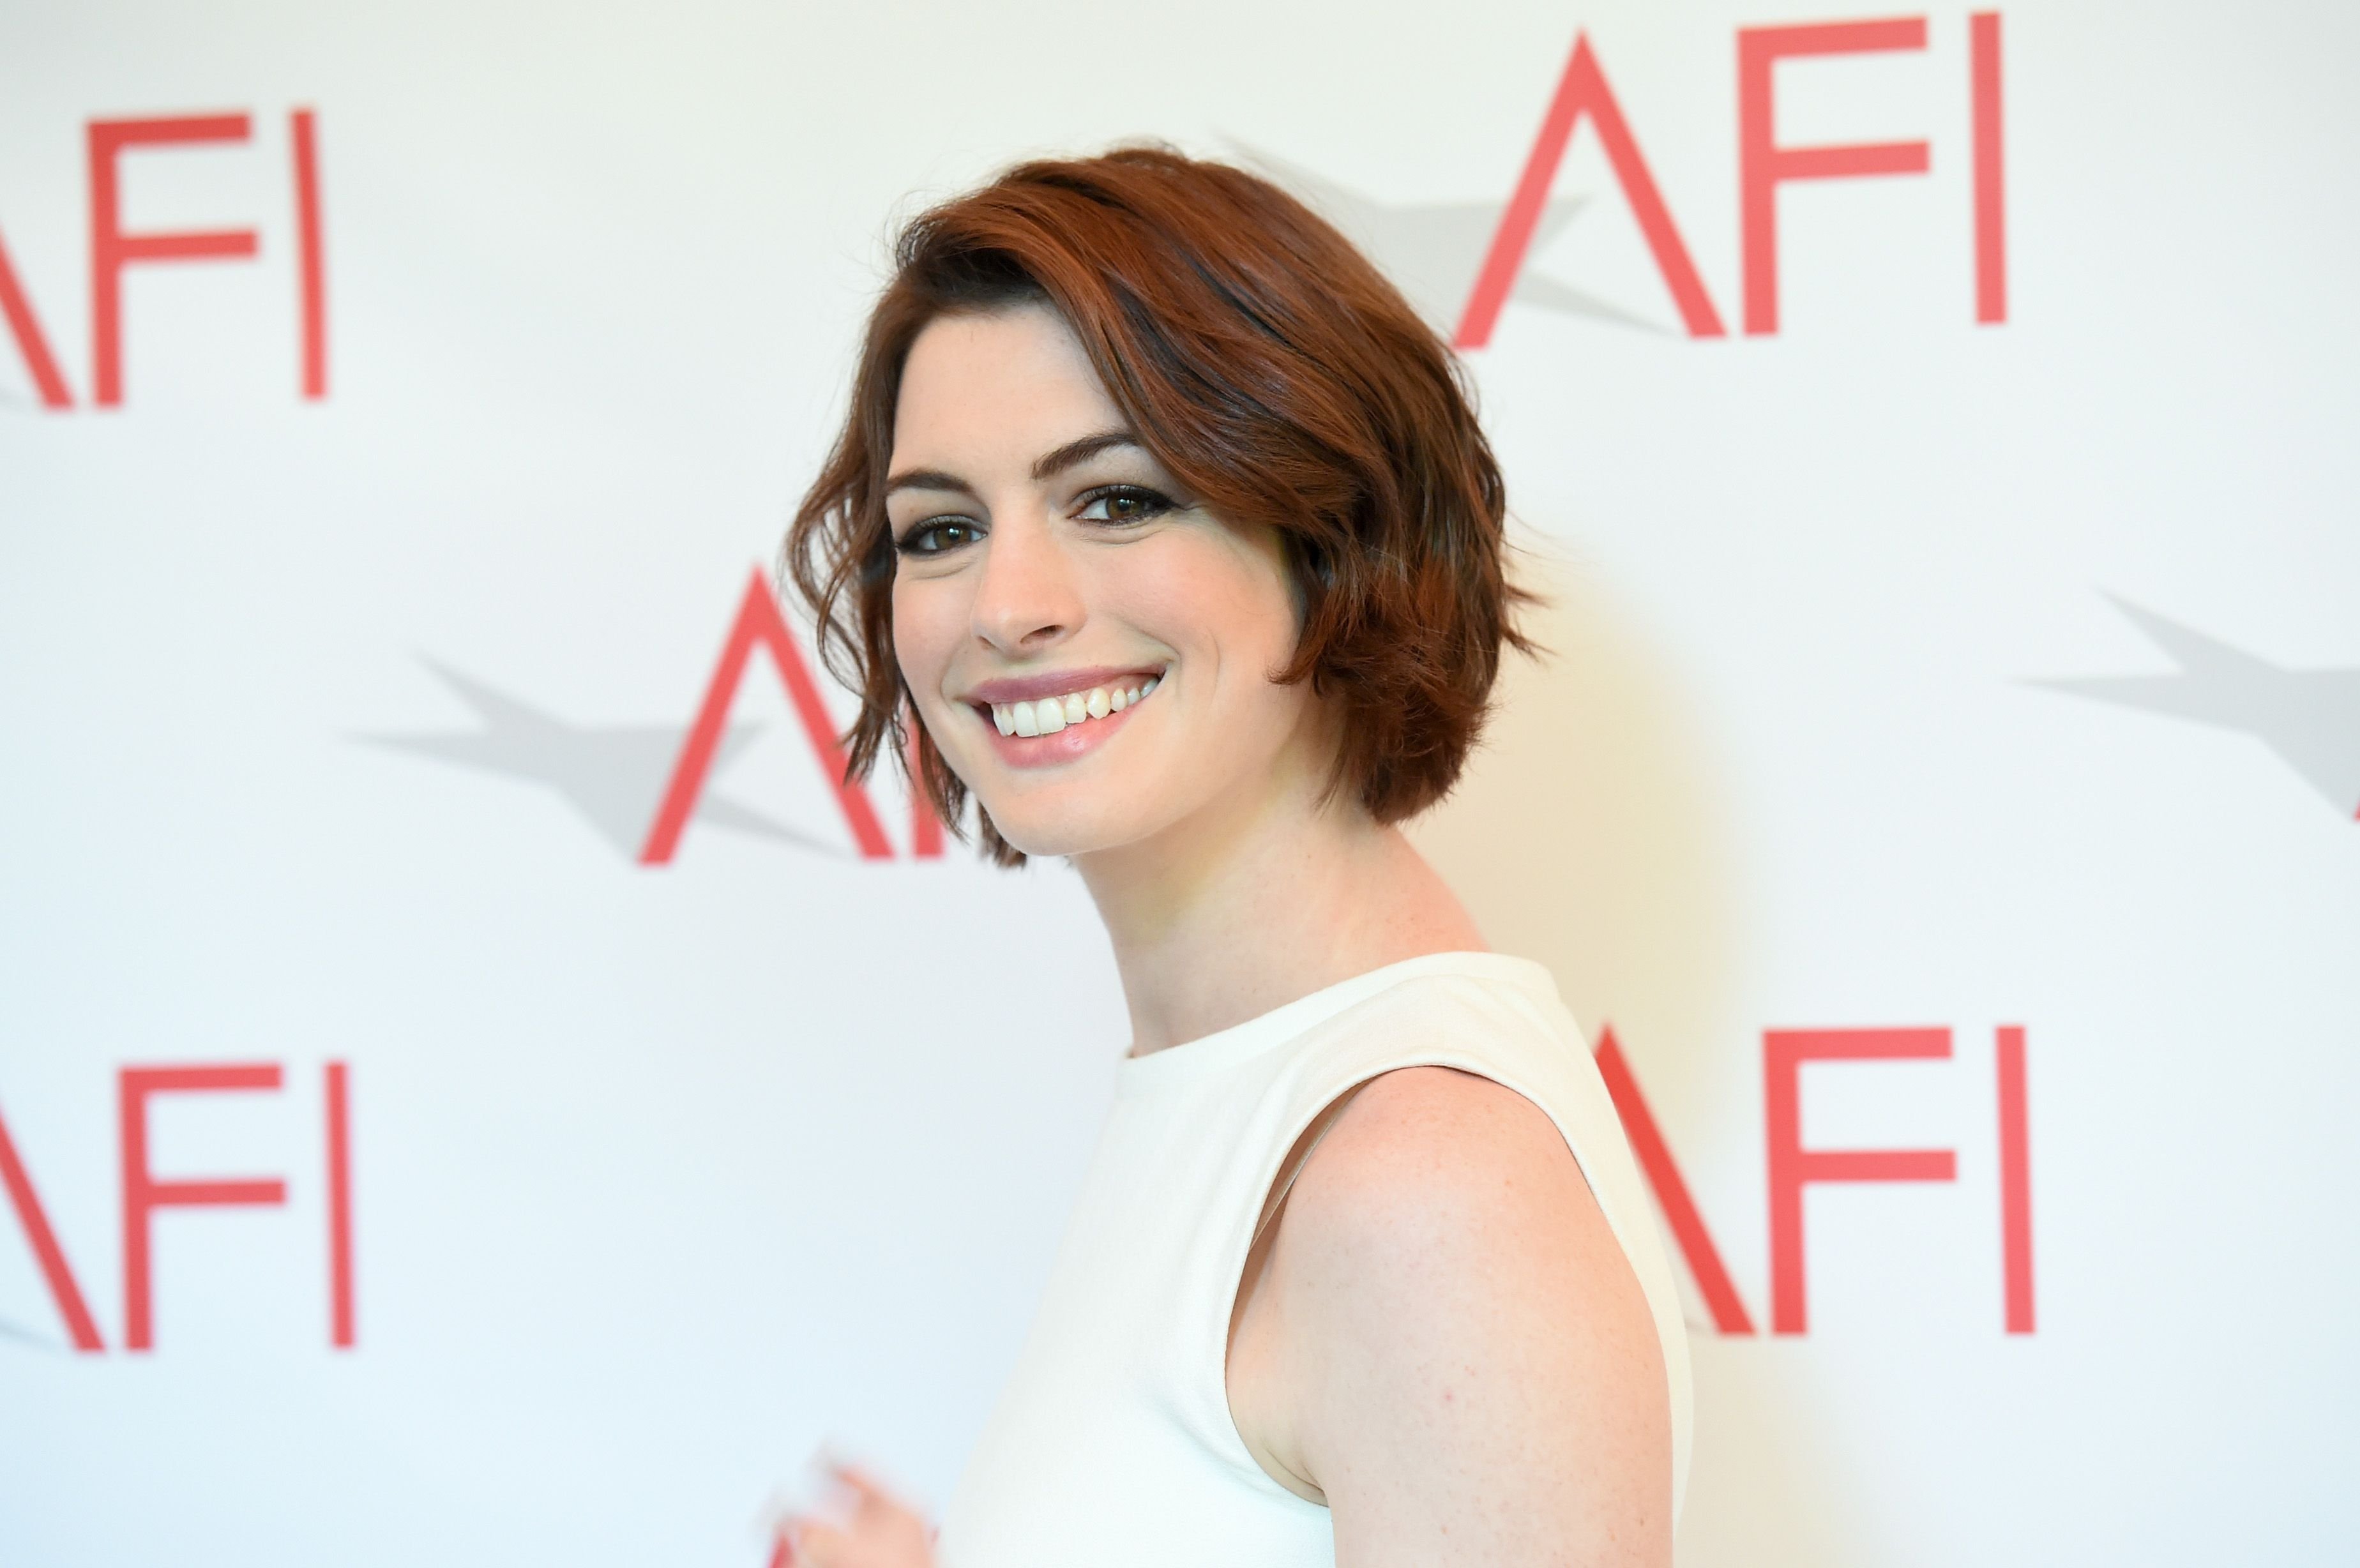 Anne Hathaway attends the 15th Annual AFI Awards in January 2015 in Beverly Hills, California | Source: Getty Images